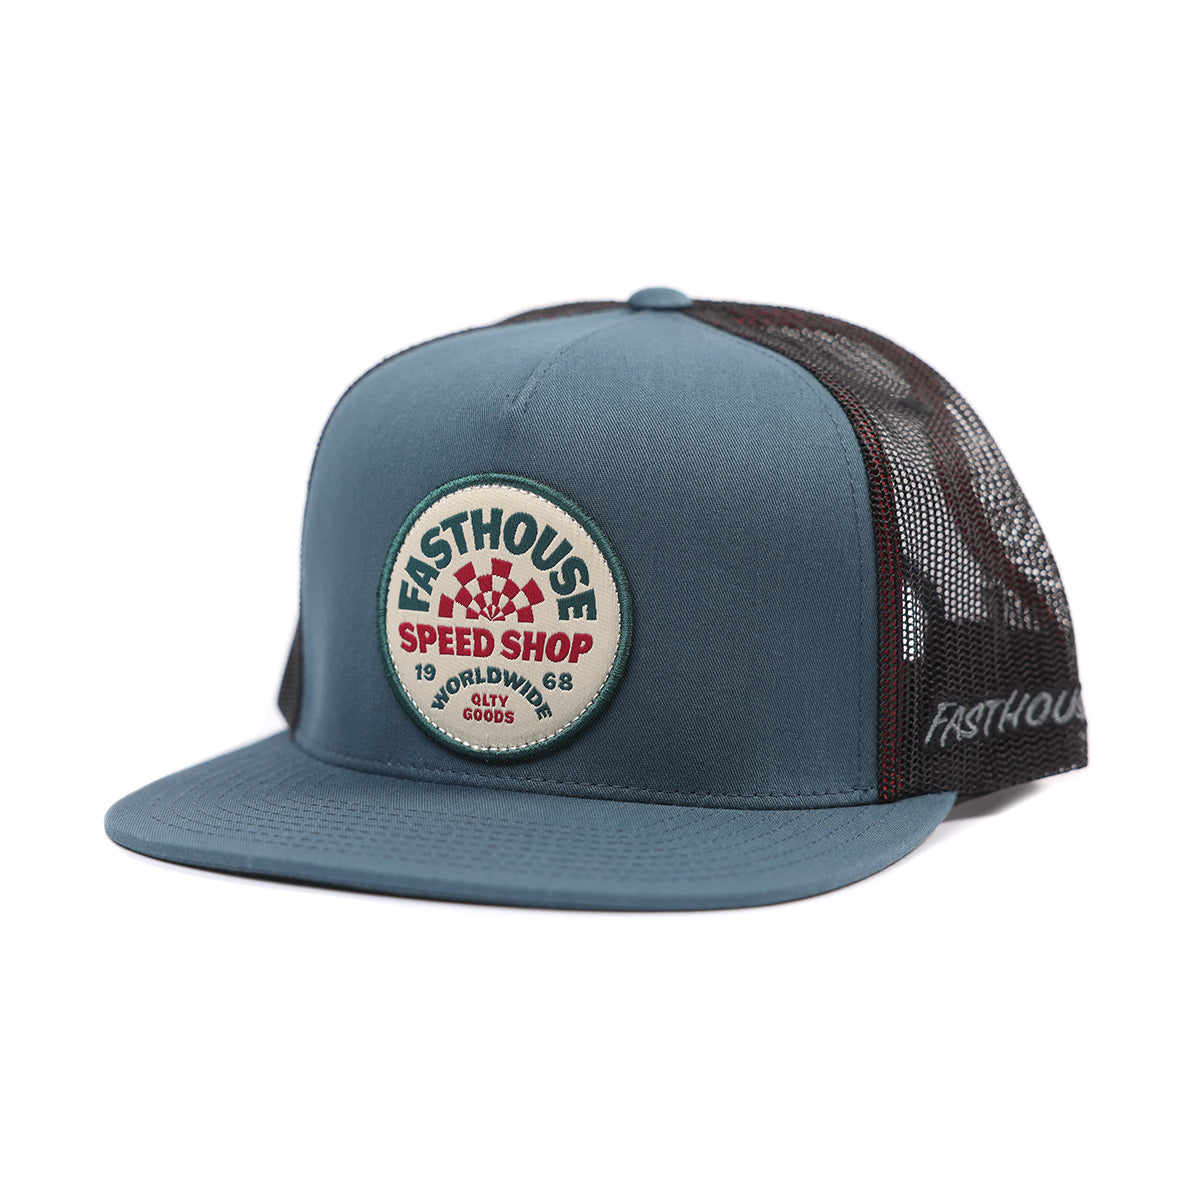 Deco Youth Hat - Slate